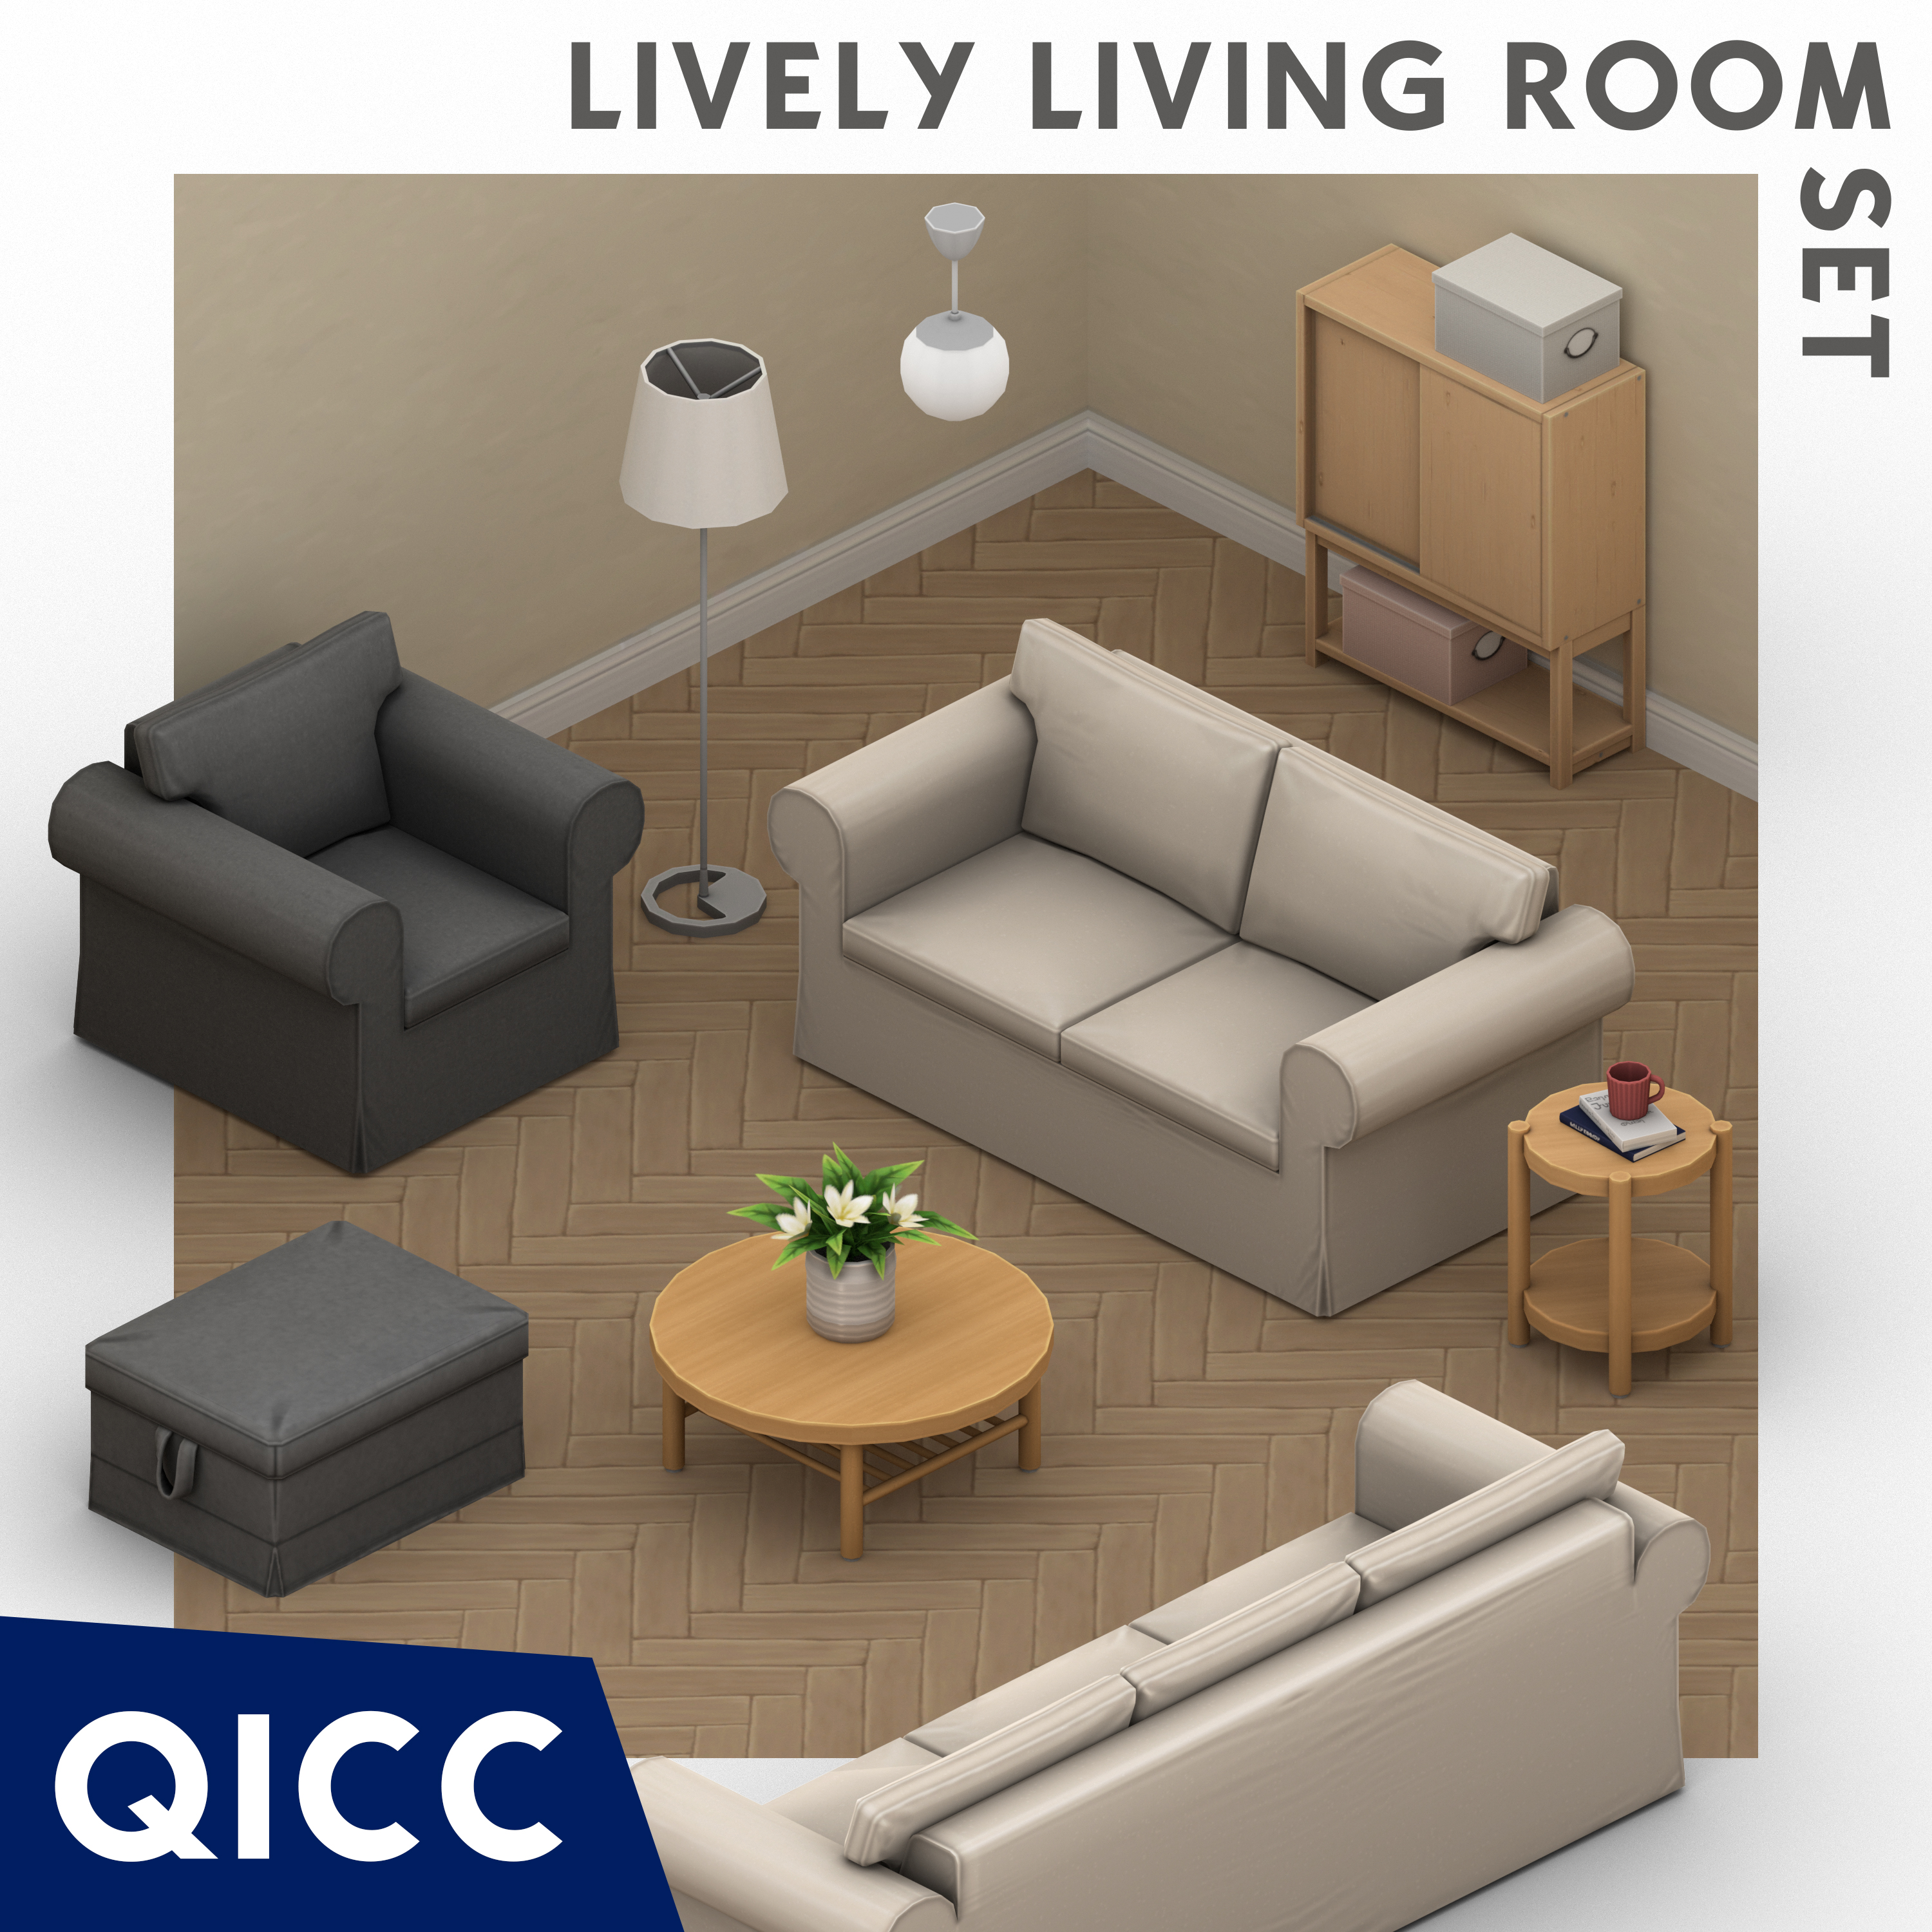 QICC - Lively Living Room Set project avatar